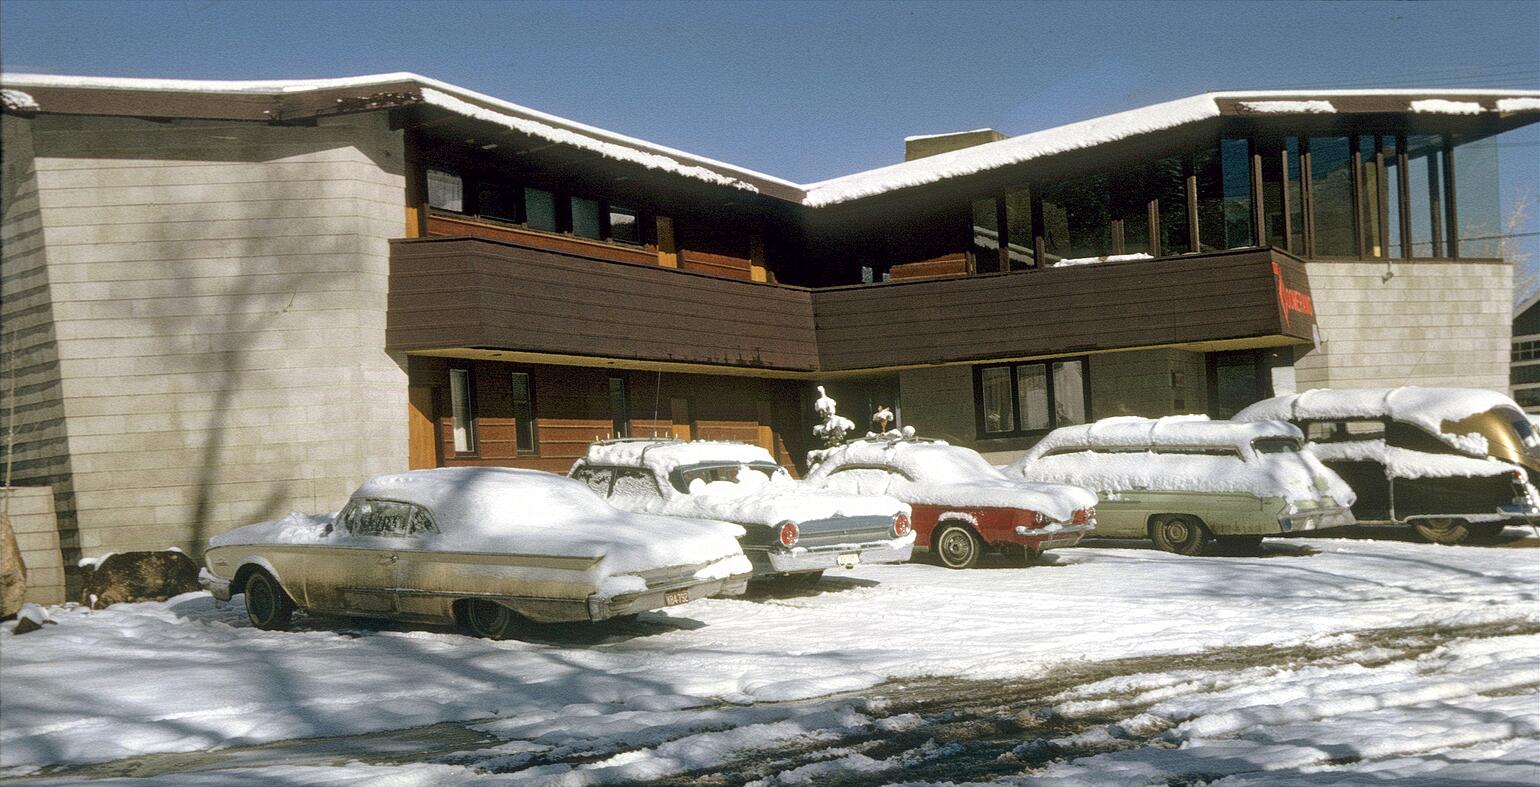 Aspen, winter 1962-63. Boomerang Lodge, designed by owner Charlie Paterson, a Frank Lloyd Wright-trained architect. The vehicle on the right is a Cadillac hearse used as a lodge limo! My 1960 Ford convertible is on the left. View full size.